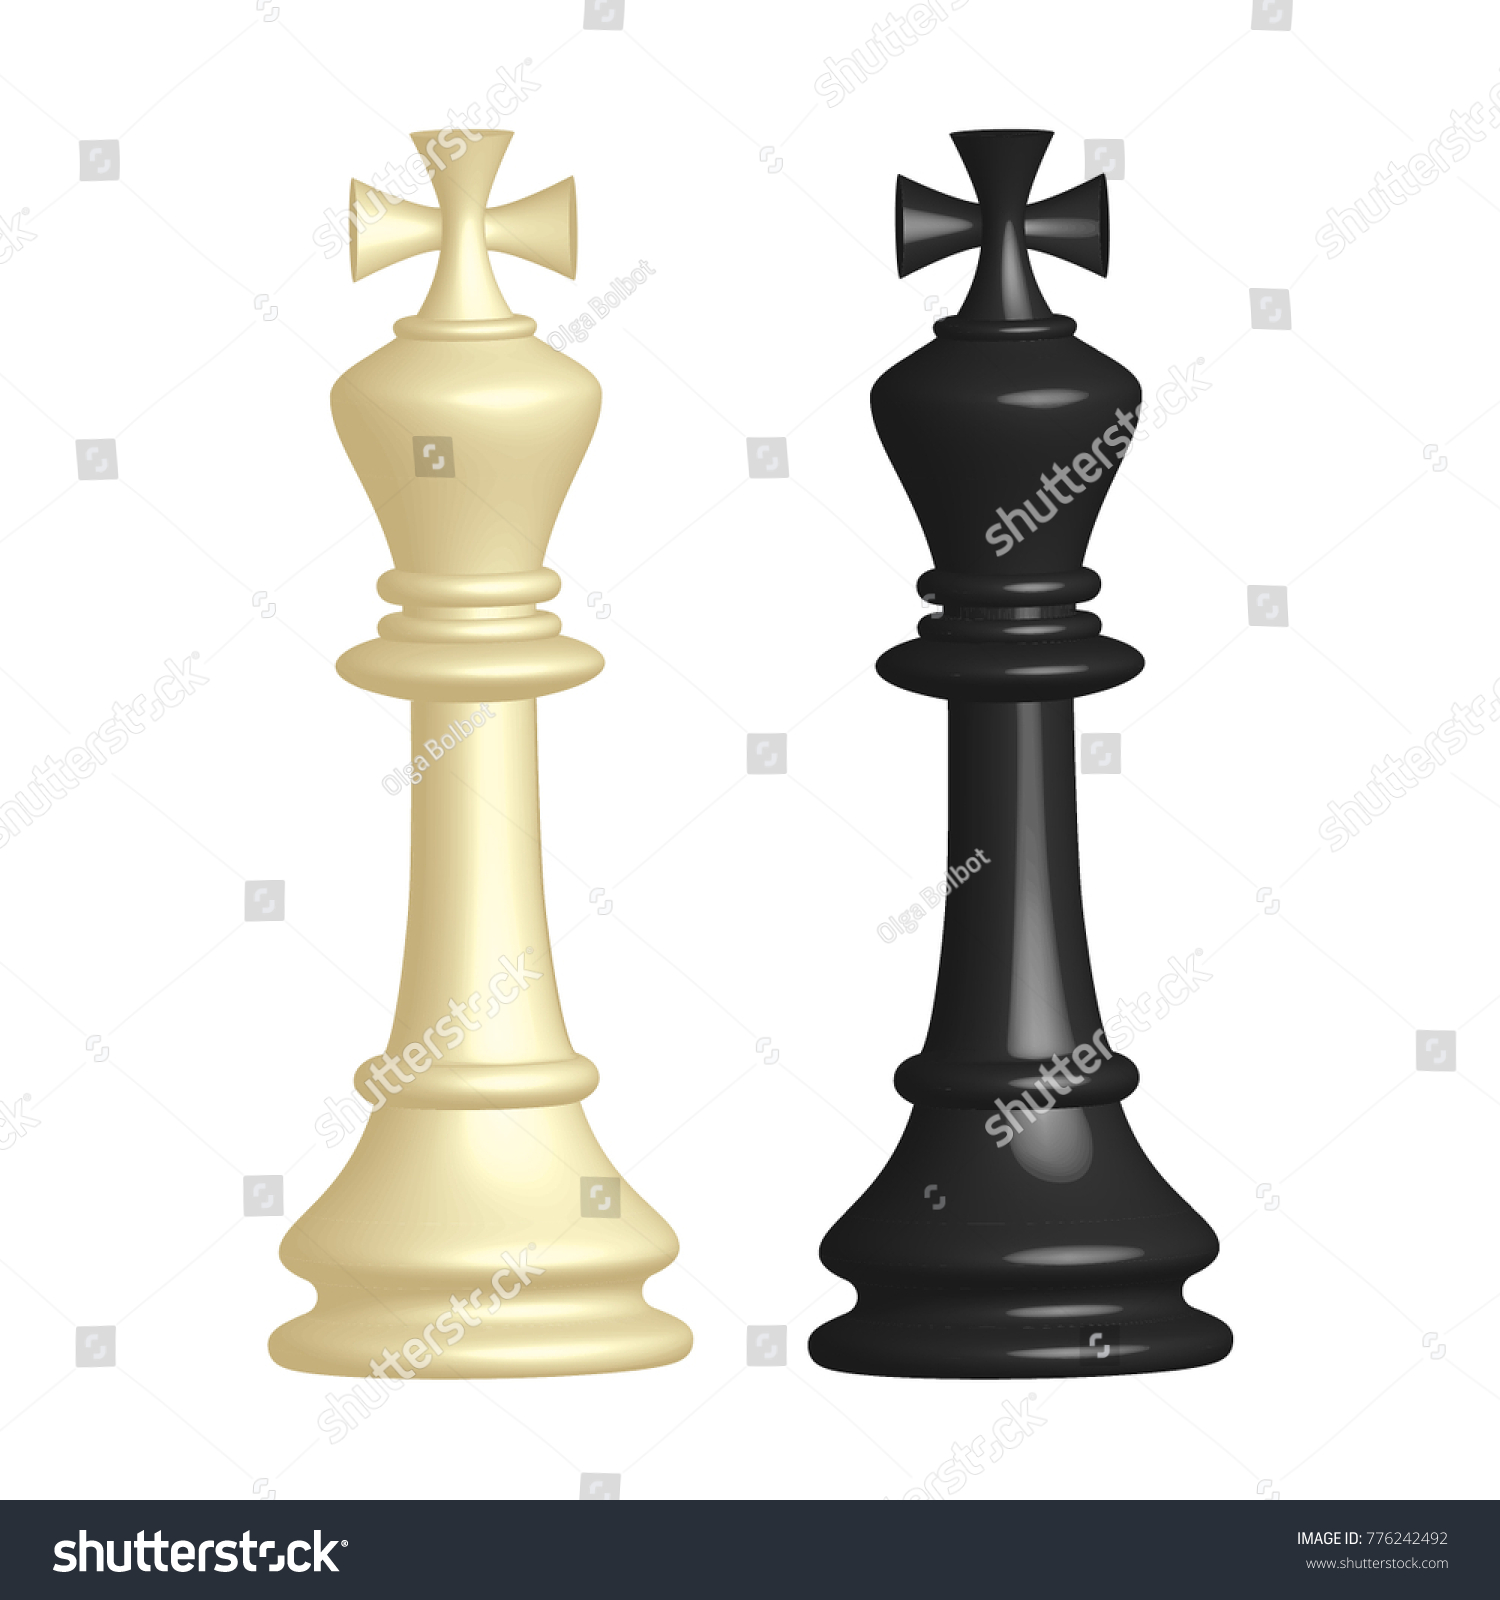 White Black Chess Piece King 3d Stock Vector (Royalty Free) 776242492 ...